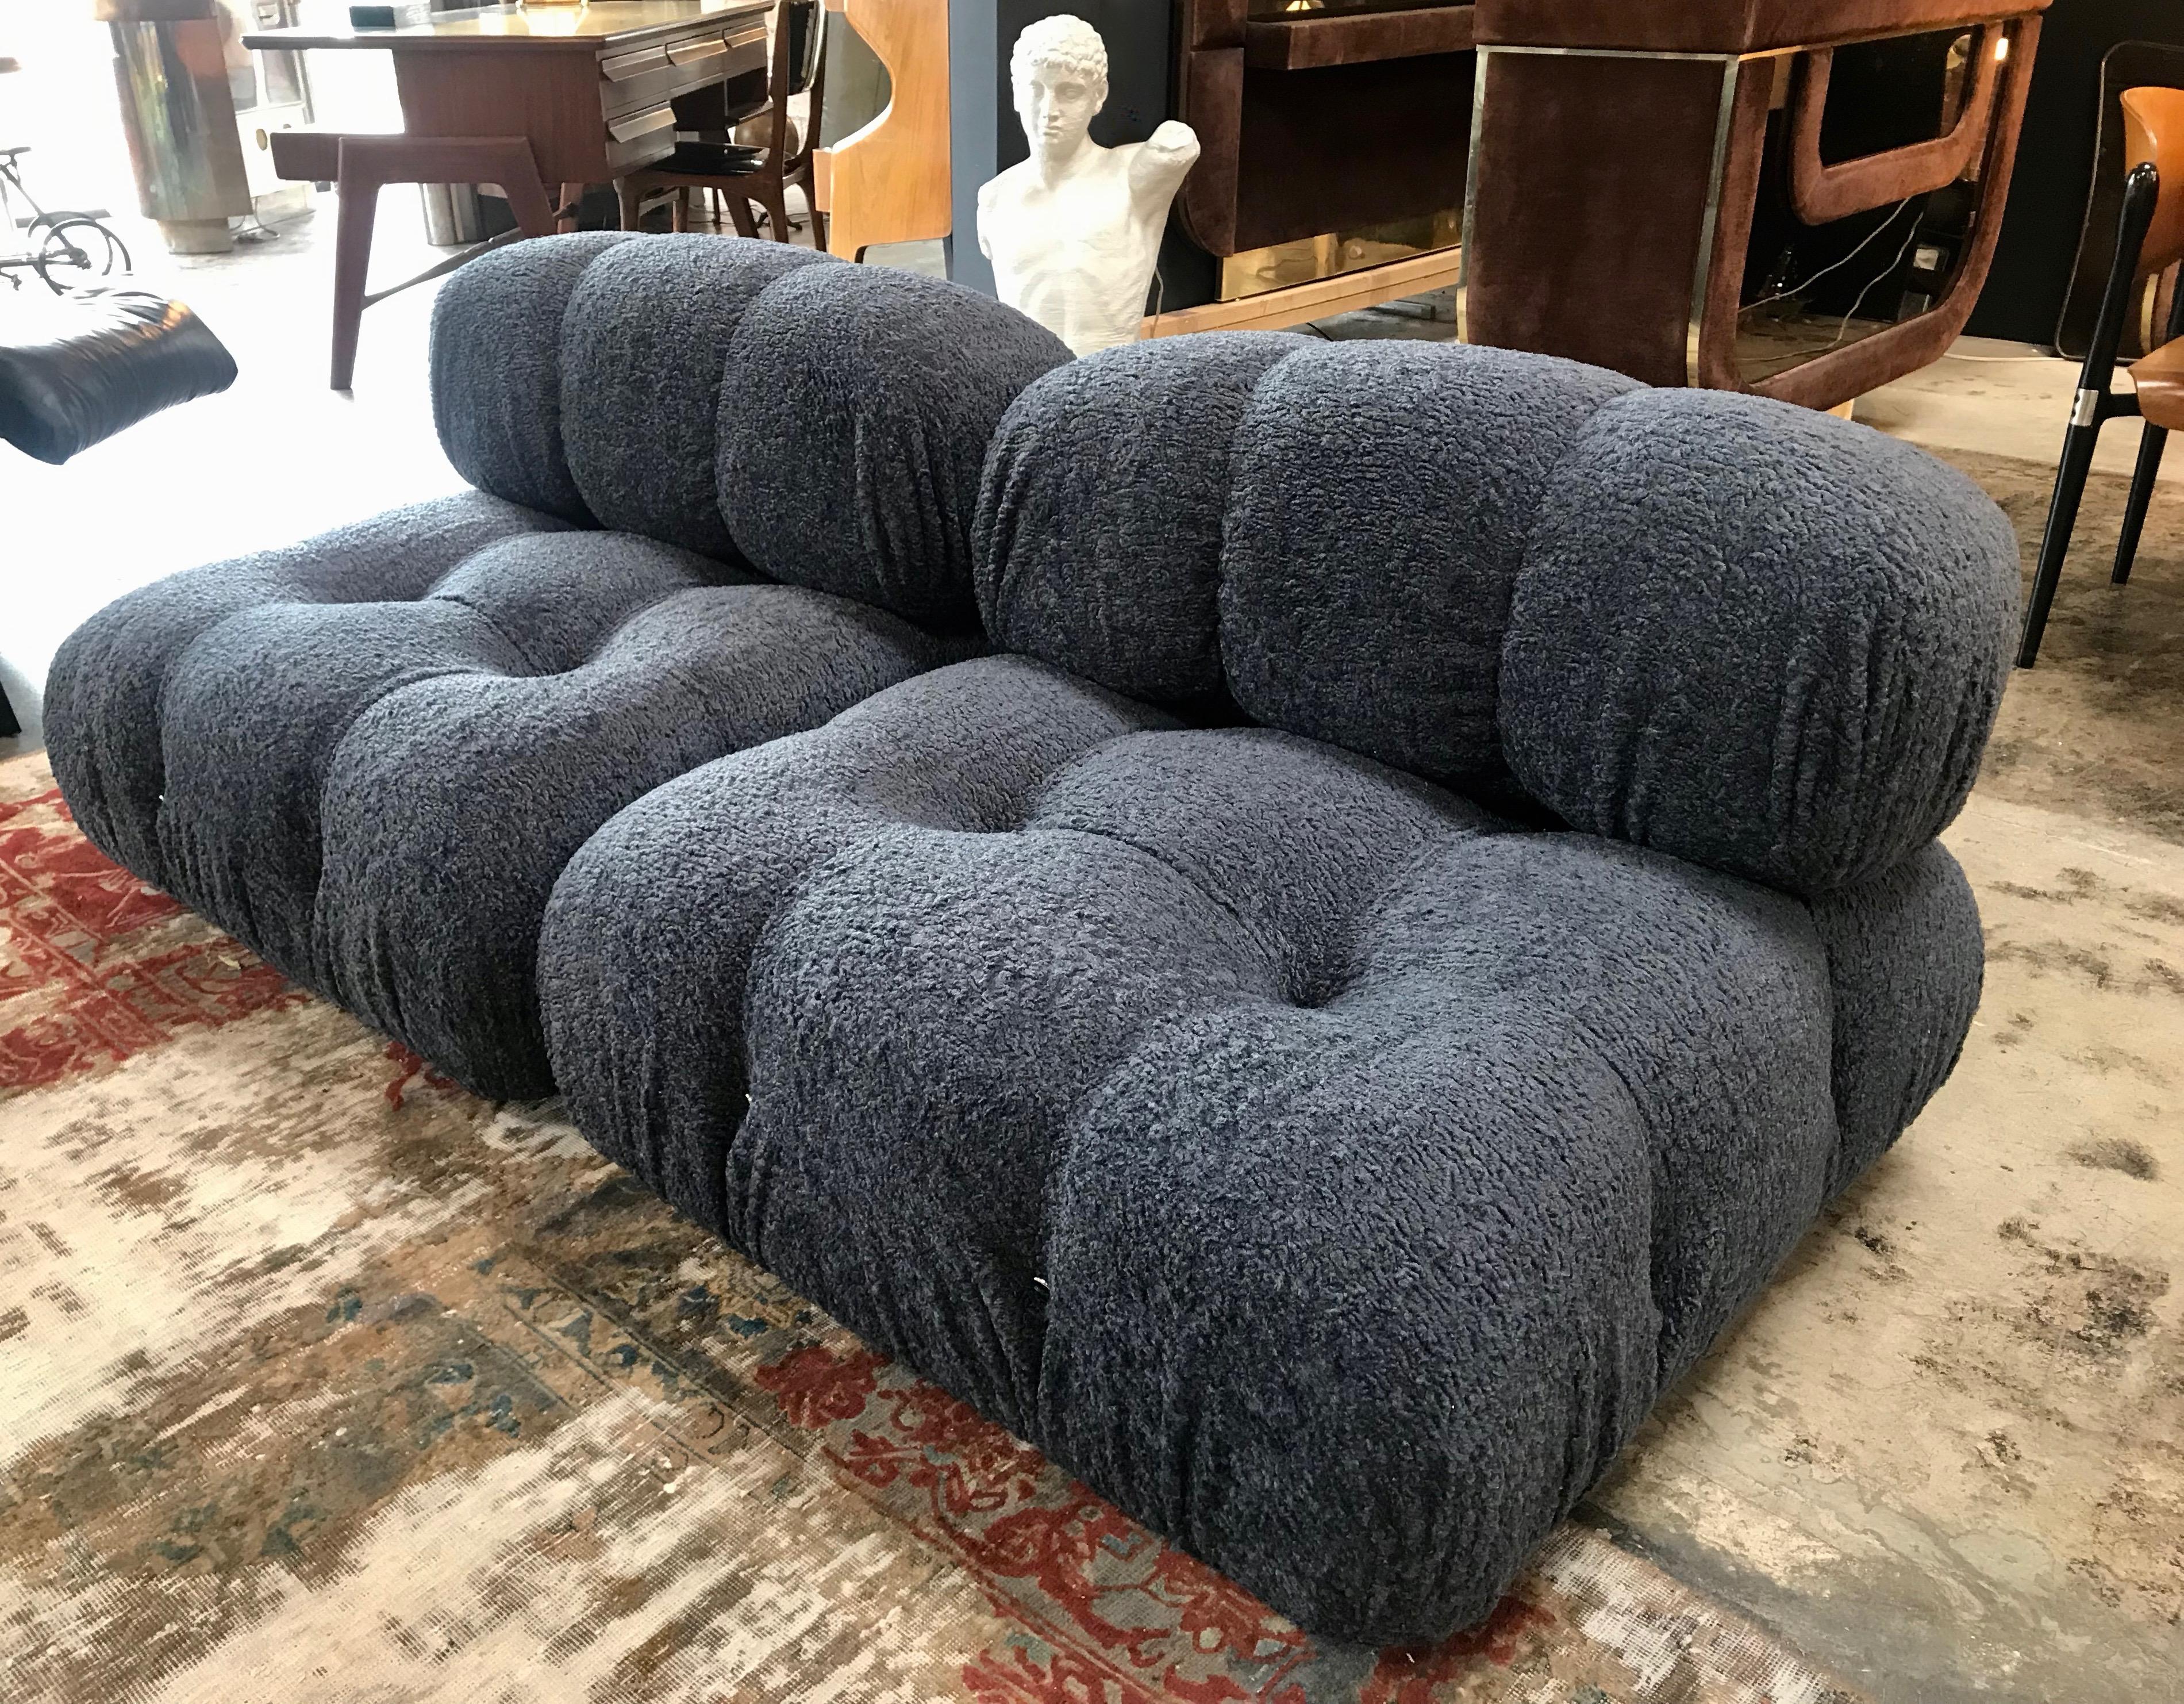 Camaleonda sectional sofa by Mario Bellini, 1970s
Mario Bellini, modular 'Camaleonda' sofa reupholstered in blue sheep fabric , Italy, 1972.
This sofa consists out of modular elements. The design became famous almost immediately after it was